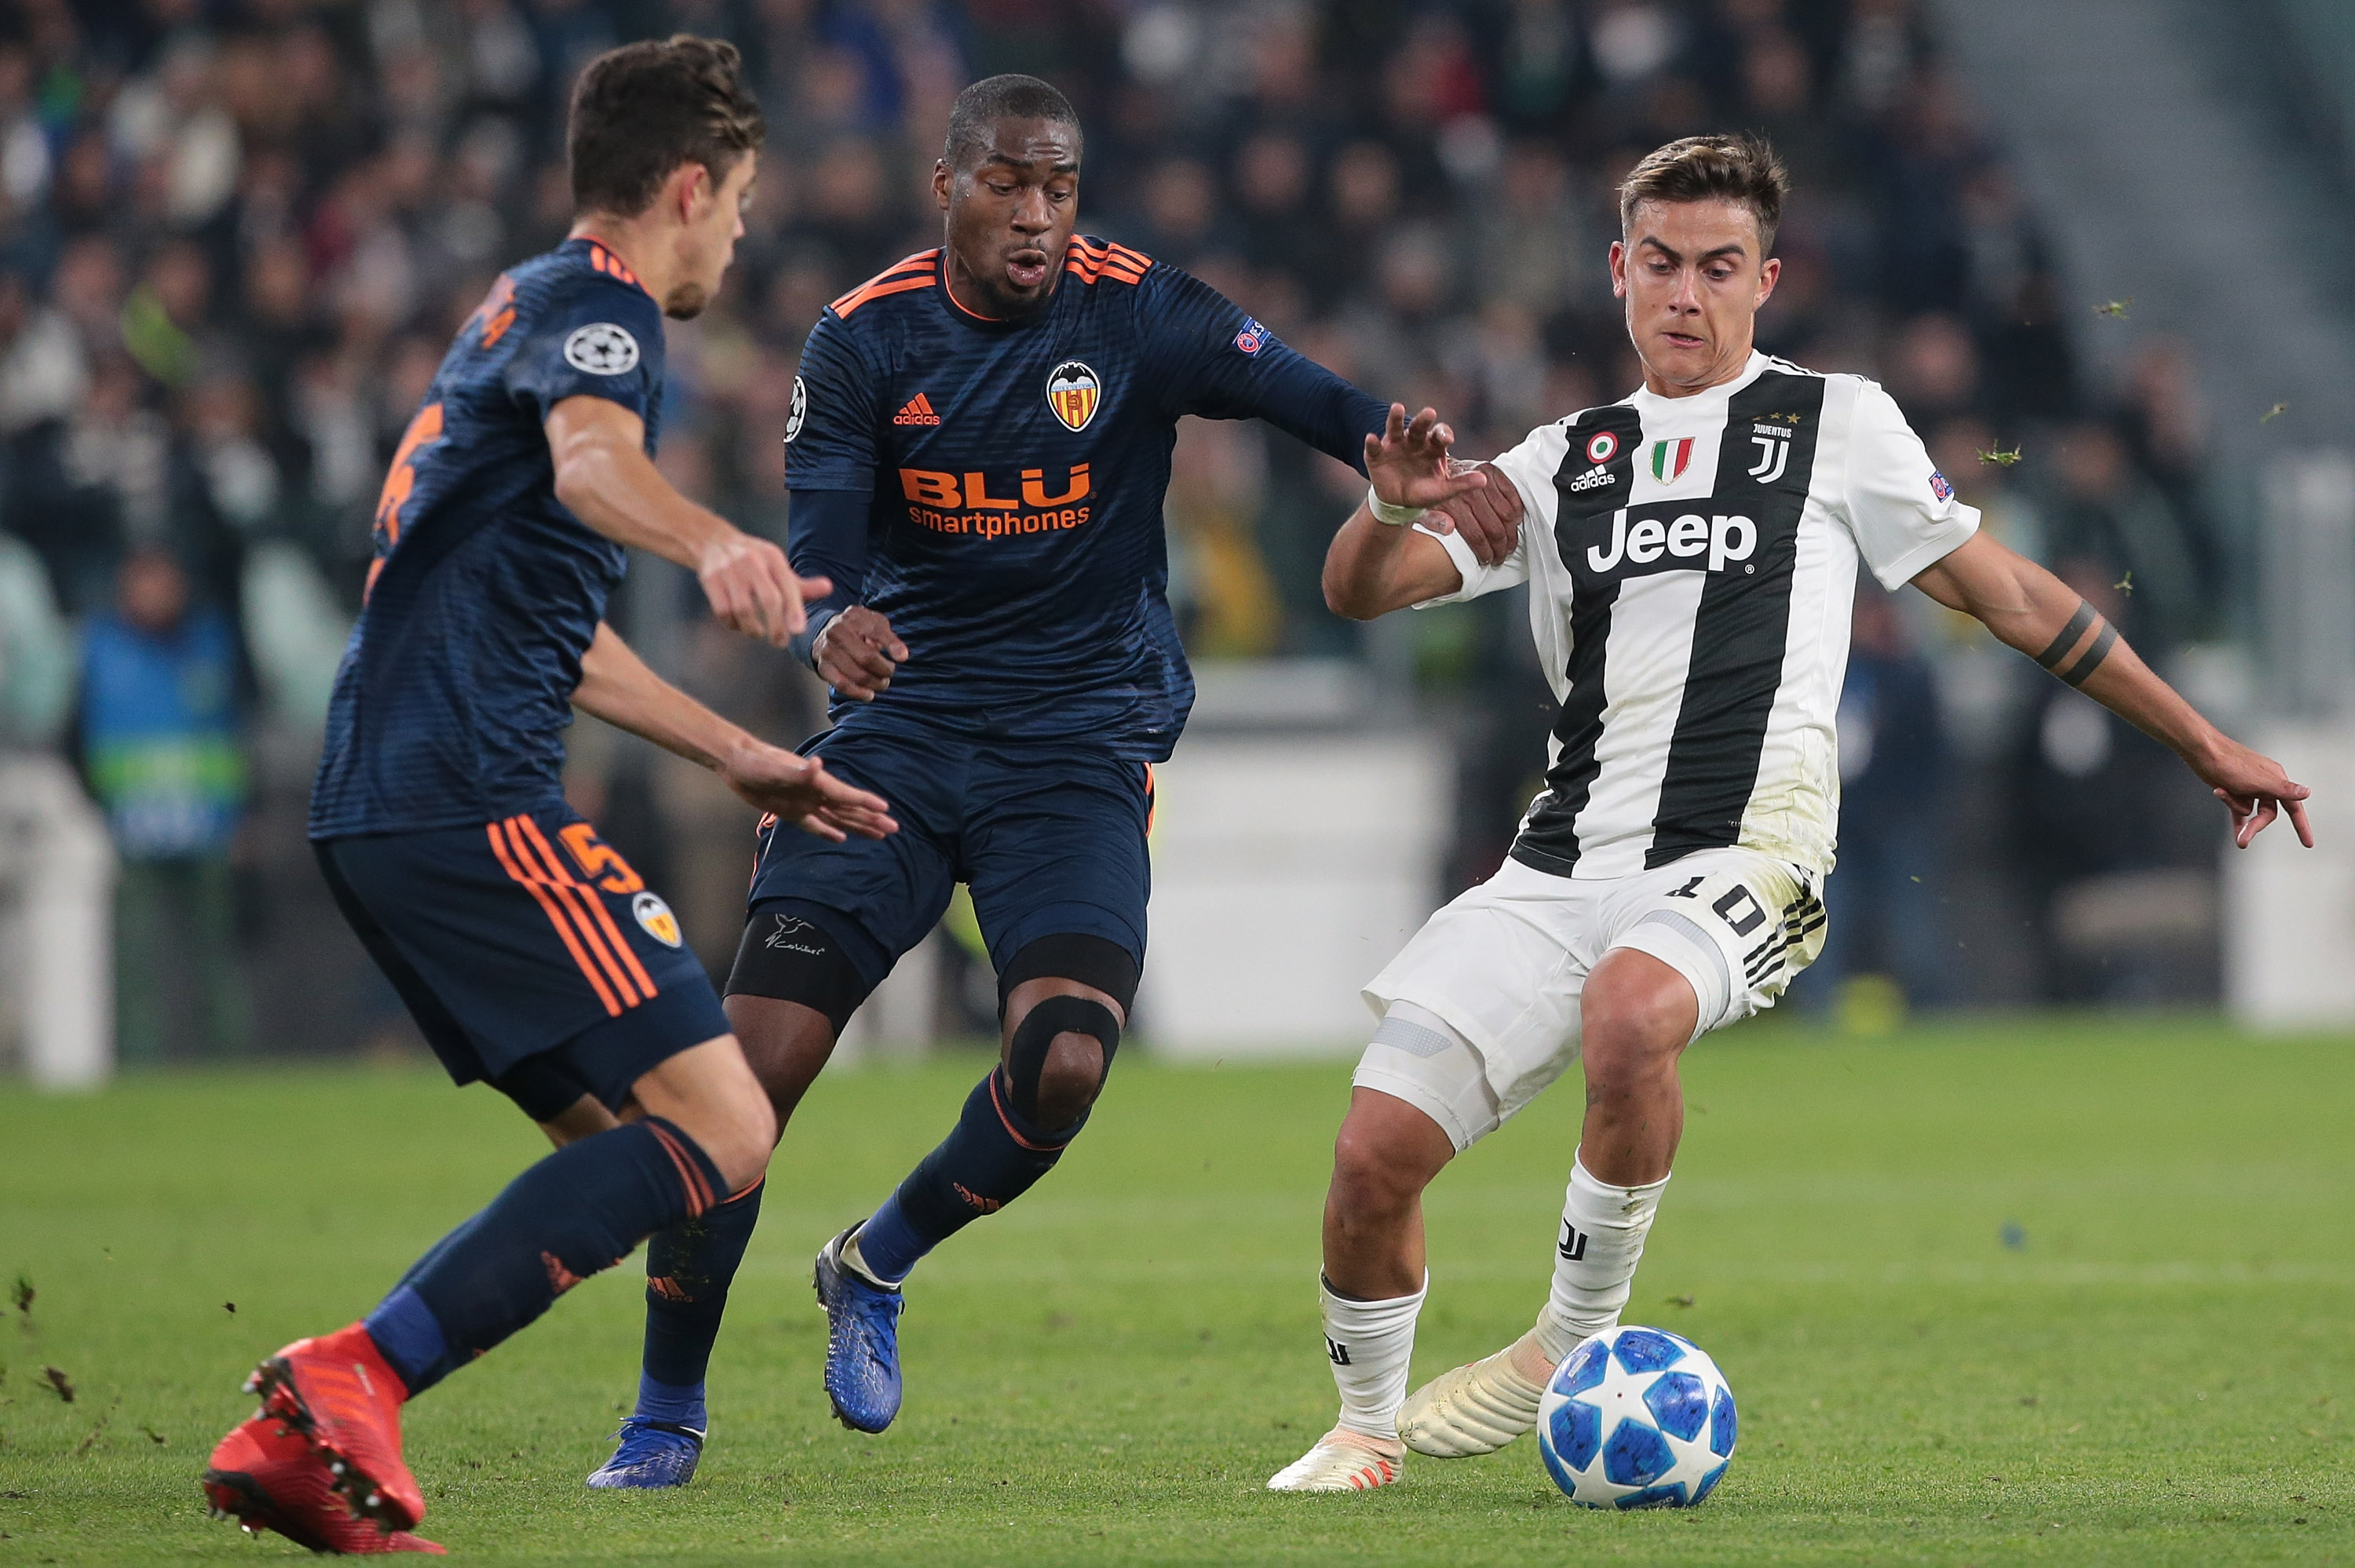 TURIN, ITALY - NOVEMBER 27:  Paulo Dybala of Juventus is challenged by Geoffrey Kondogbia of Valencia CF during the Group H match of the UEFA Champions League between Juventus and Valencia at Allianz Stadium on November 27, 2018 in Turin, Italy.  (Photo by Emilio Andreoli/Getty Images)